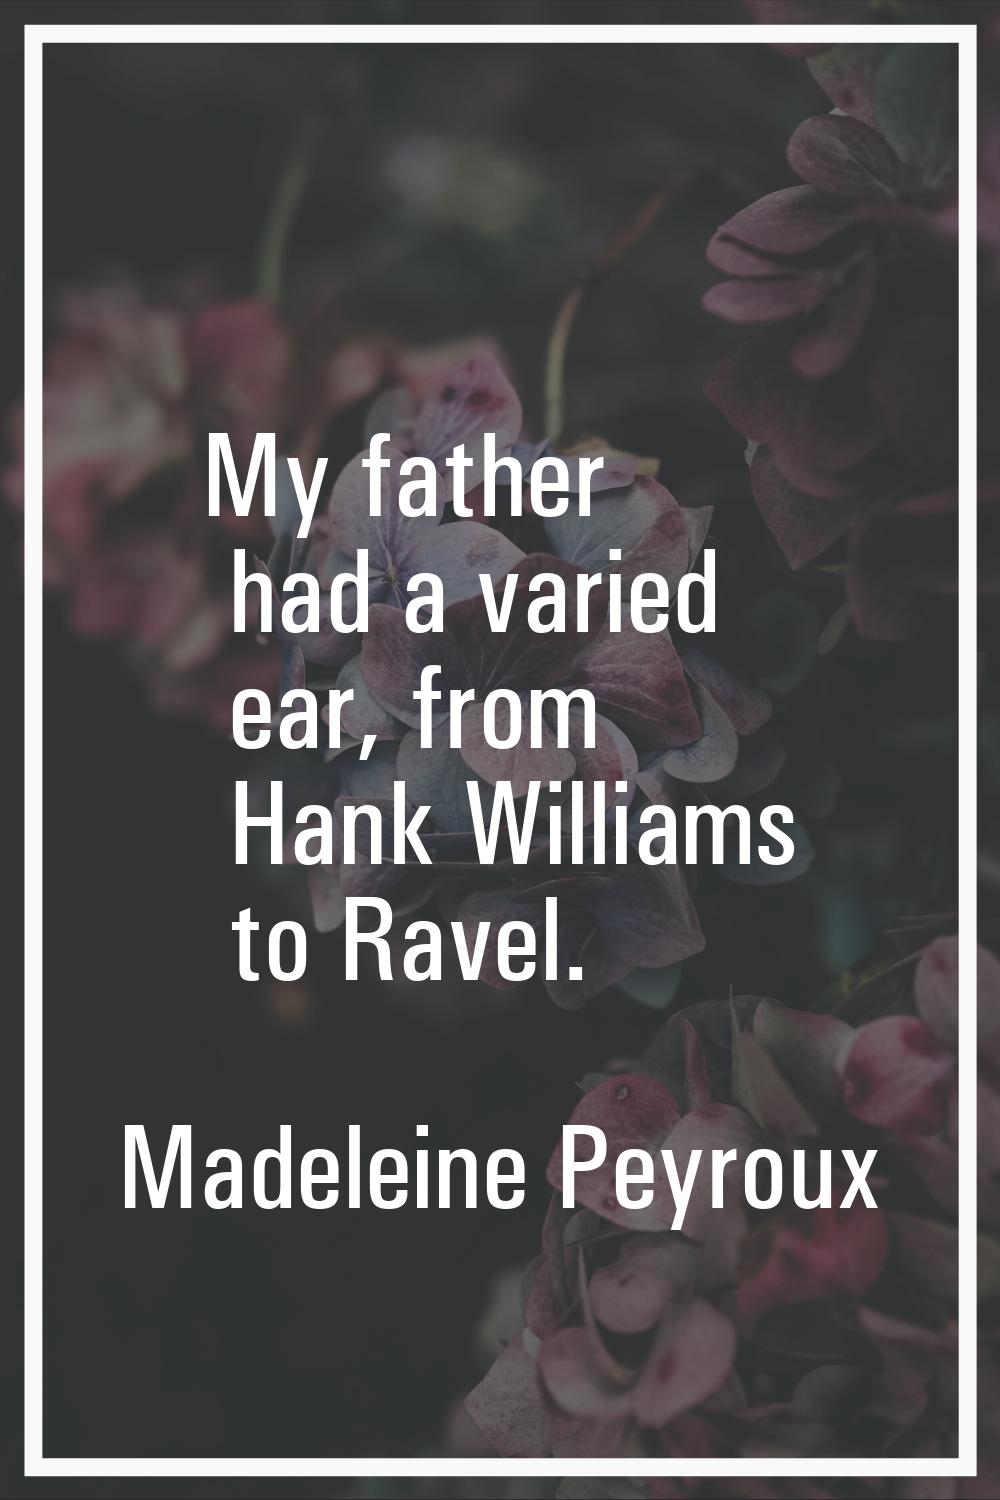 My father had a varied ear, from Hank Williams to Ravel.